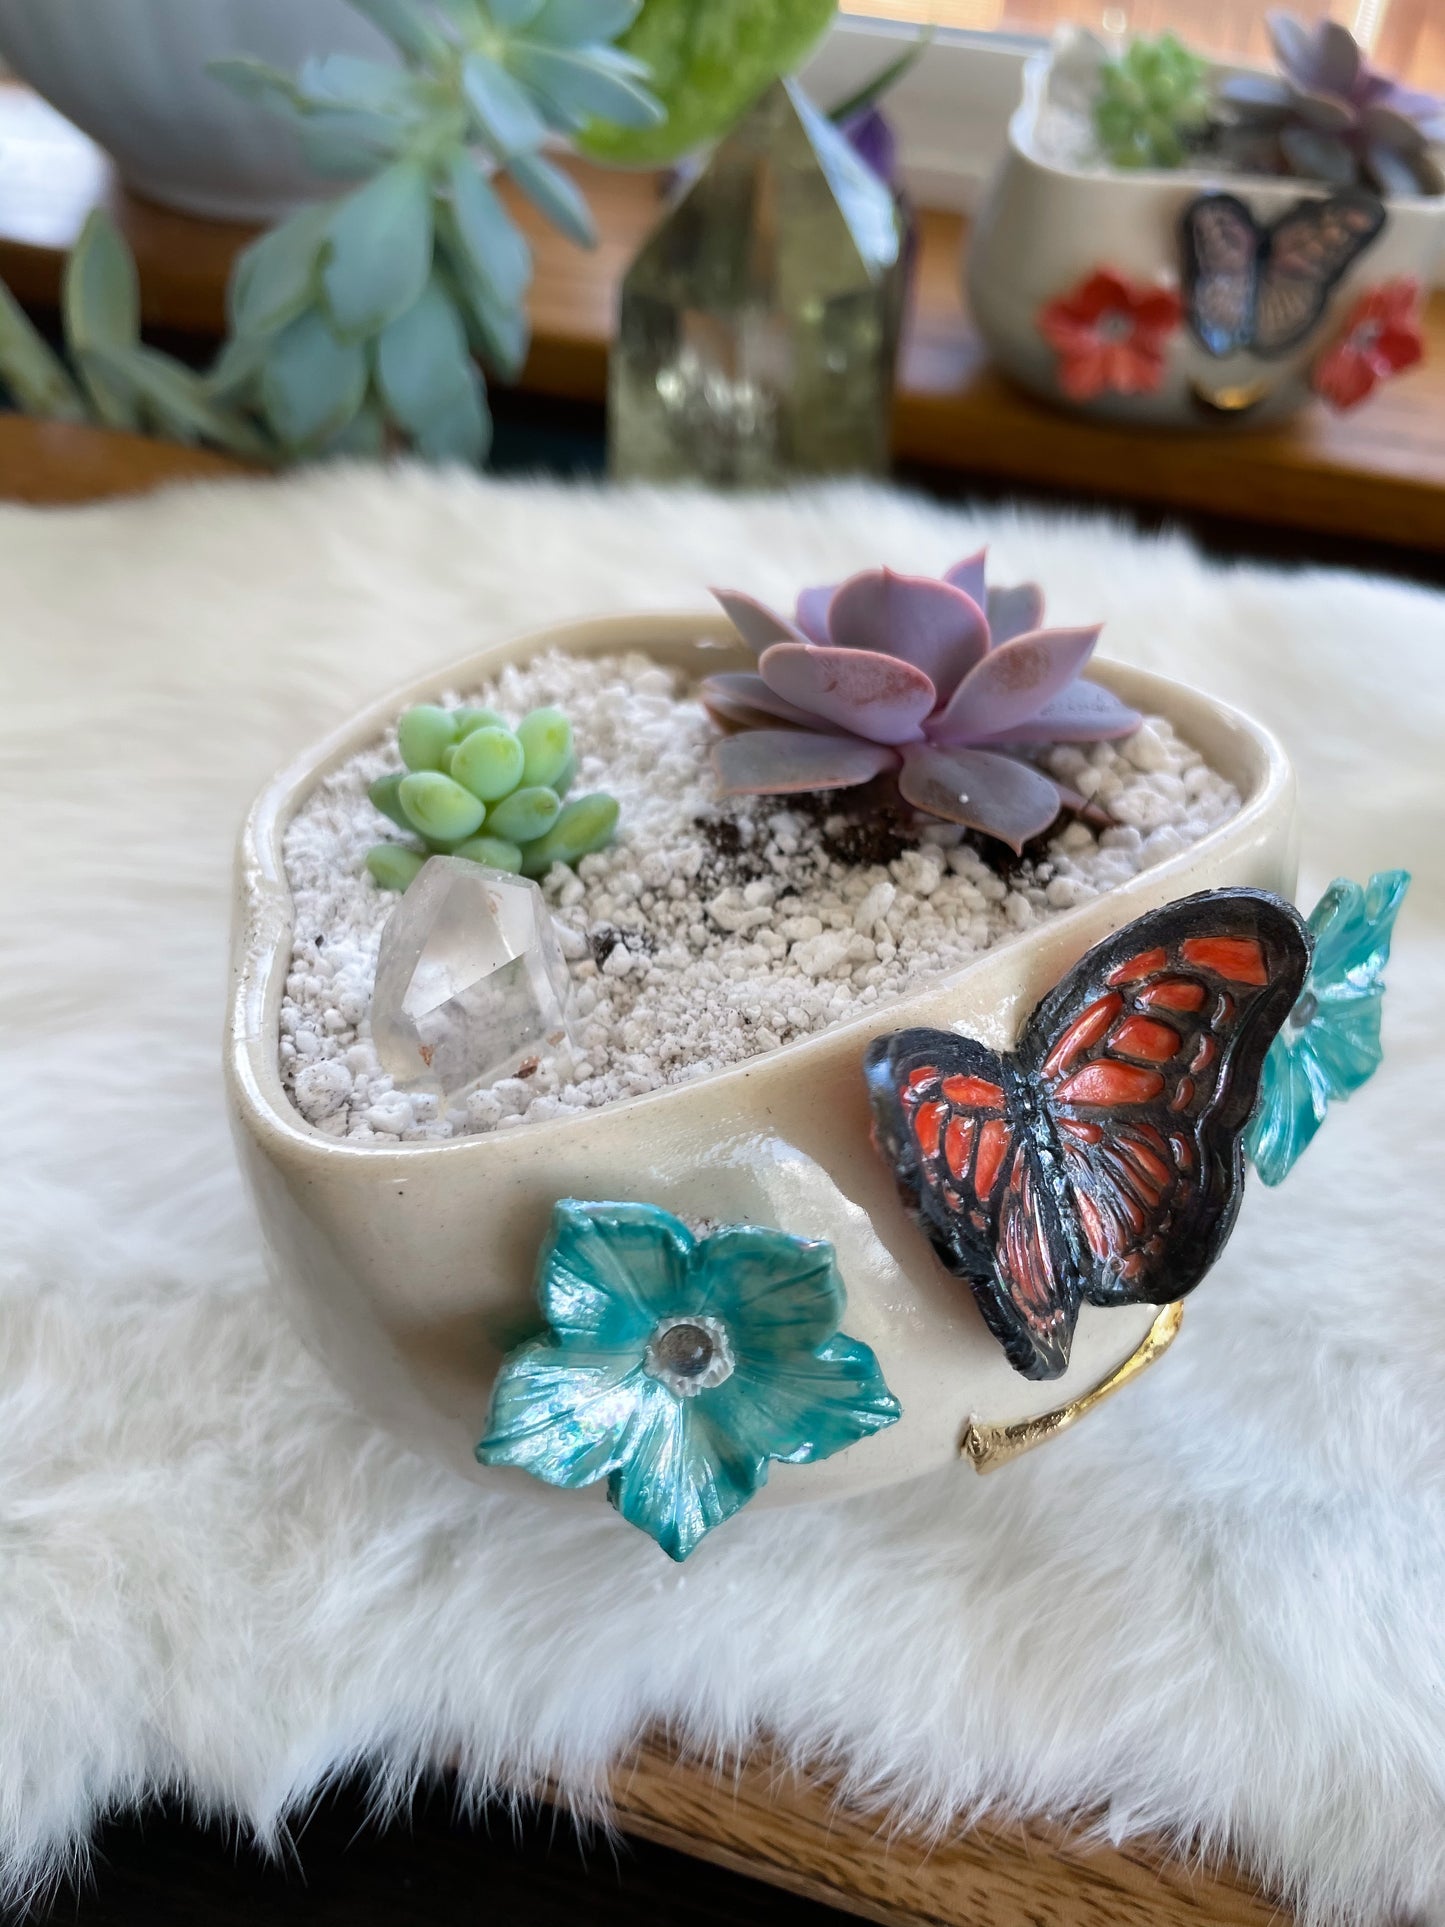 Butterfly & Moon succulent Planter or Smudge Pot